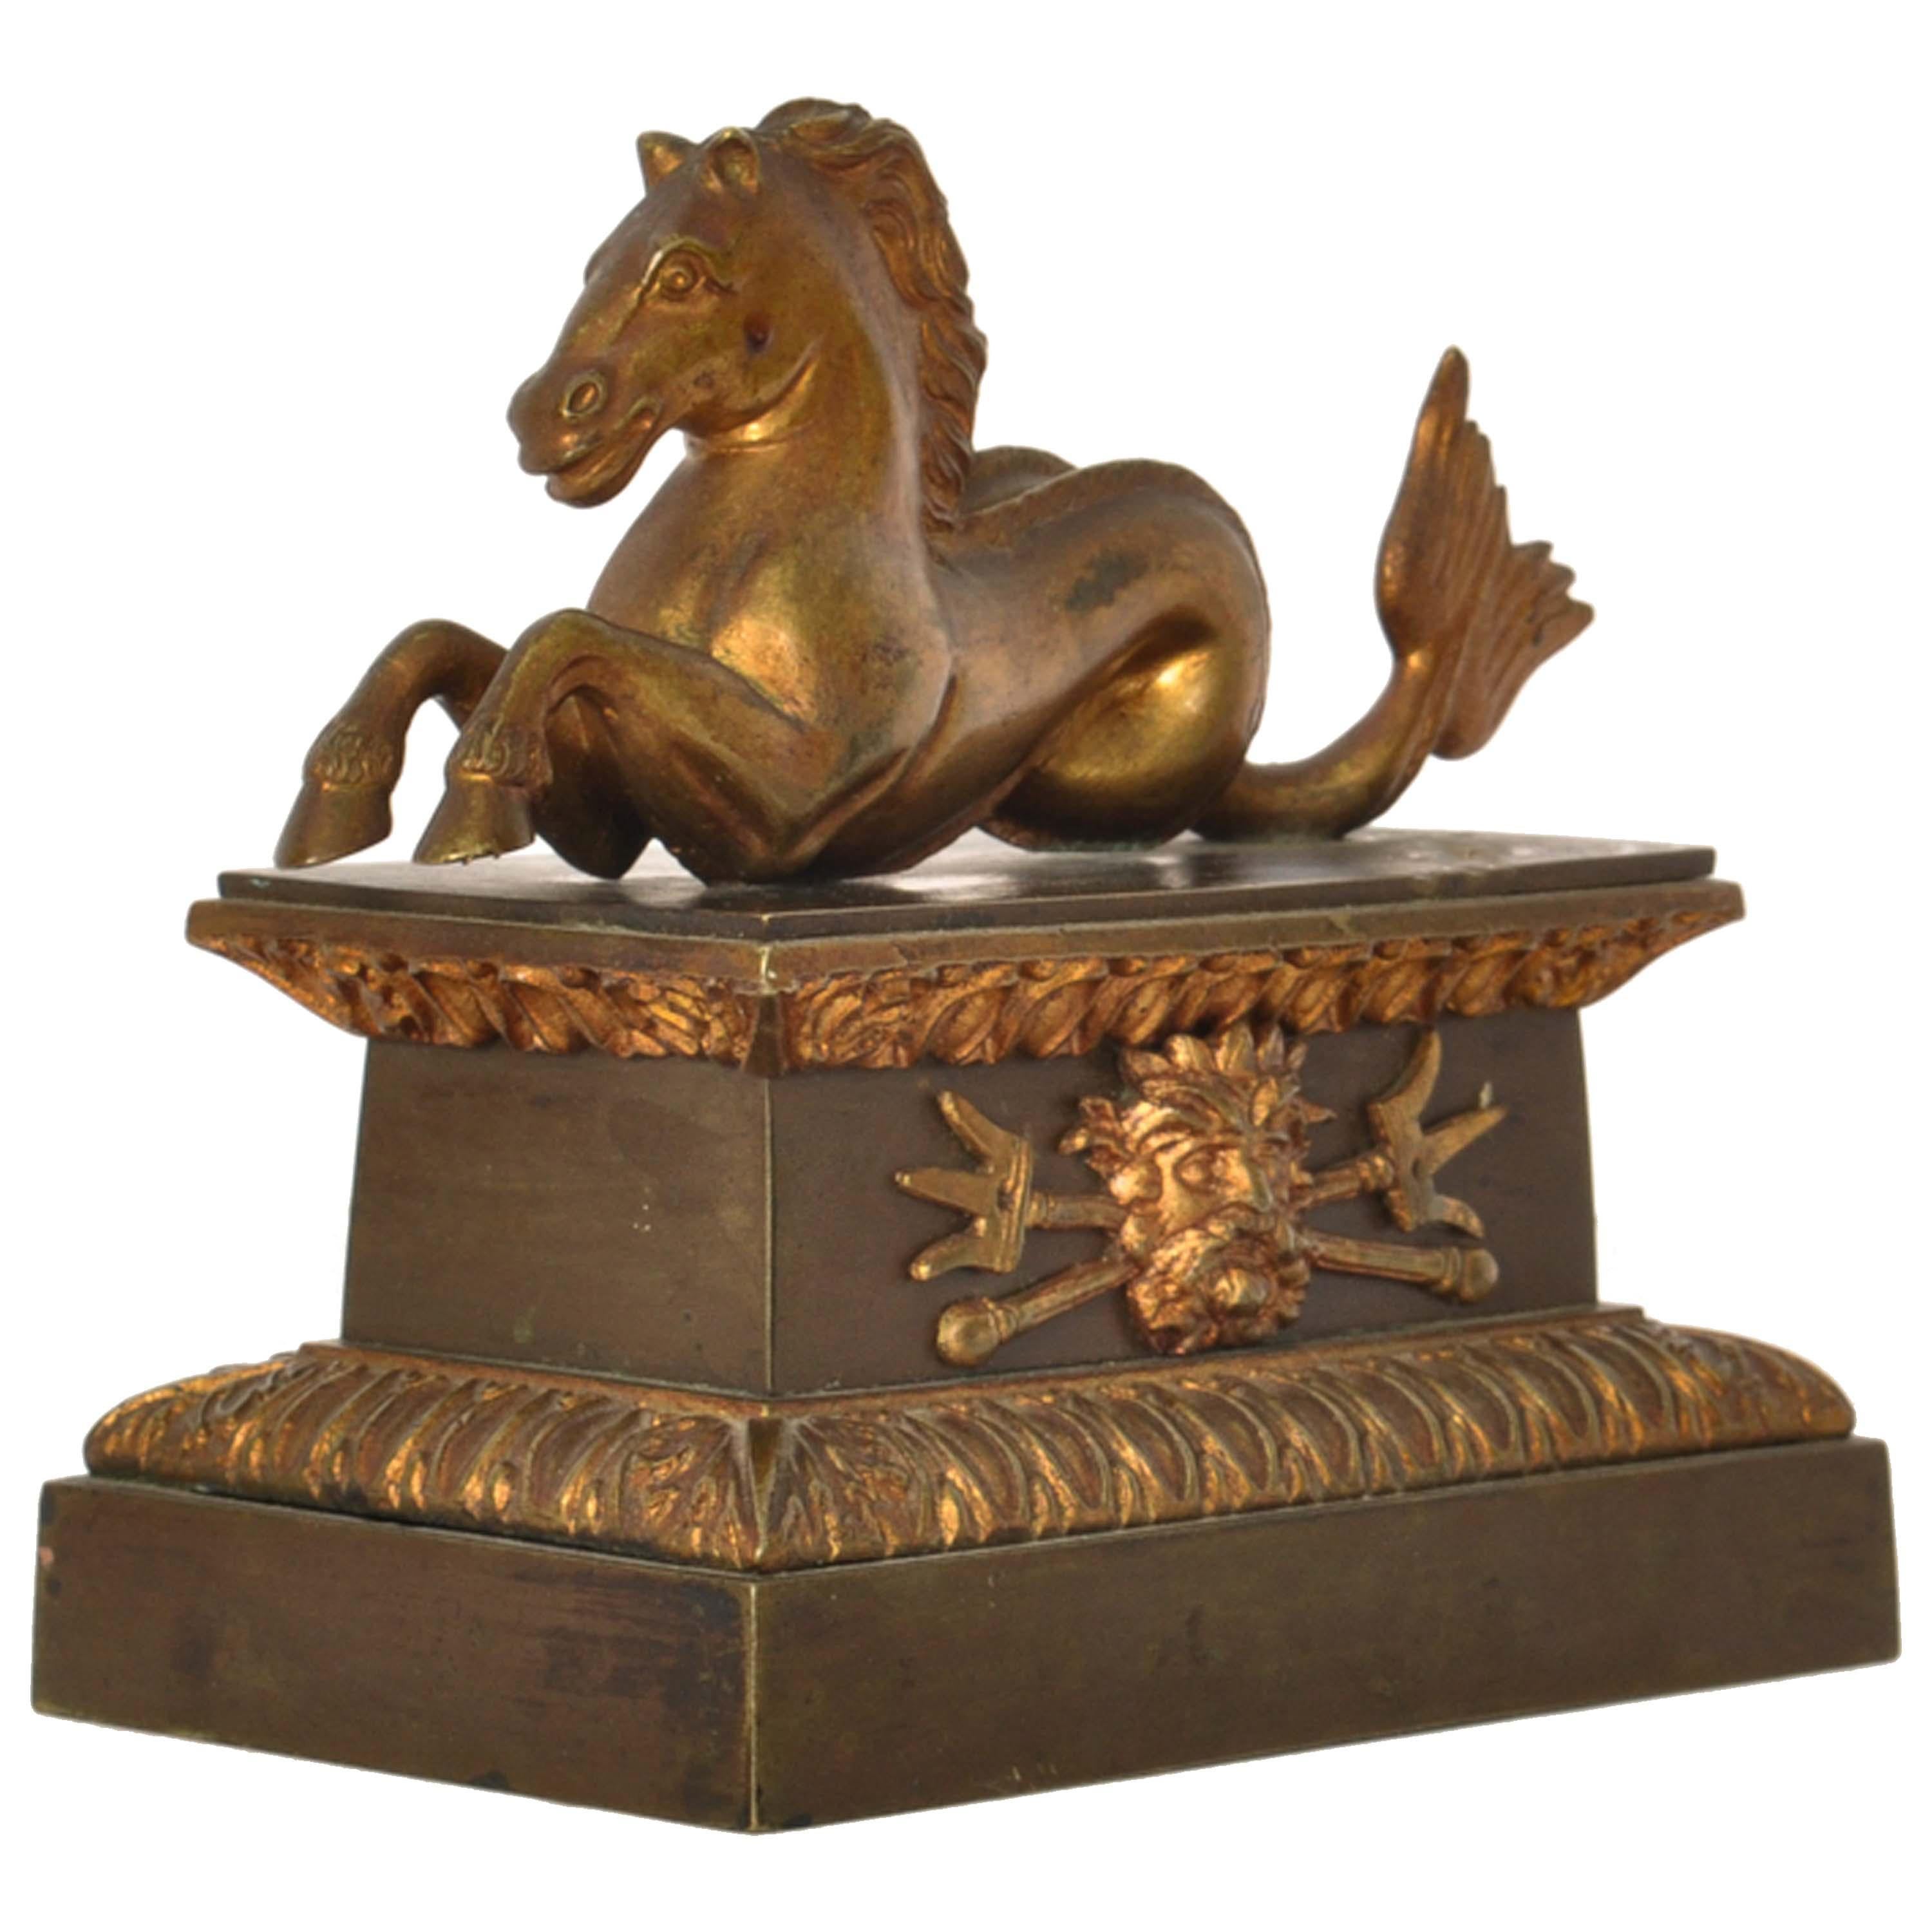 Antique French Grand Tour Bronze Statue Hippocampus Seahorse Desk Ornament 1820 In Good Condition For Sale In Portland, OR